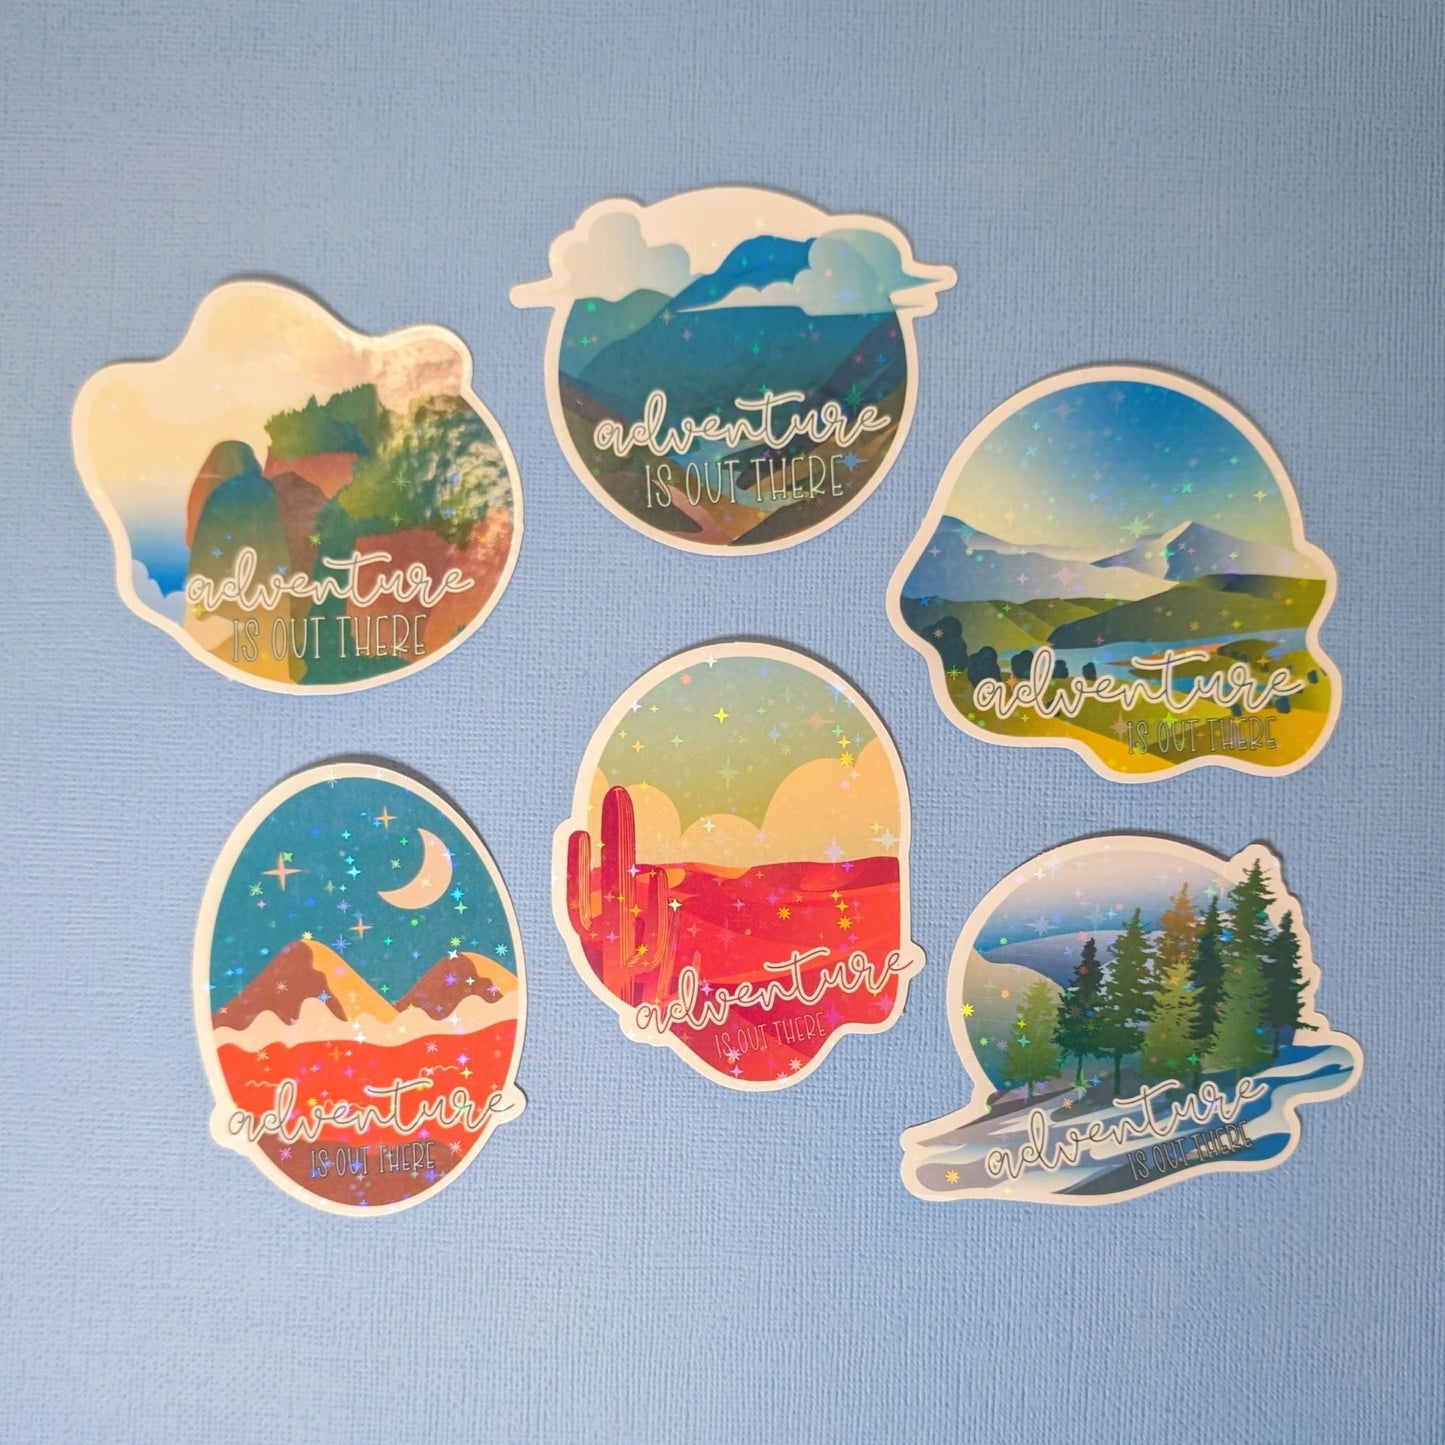 Adventure Is Out There! Holographic Stars - Specialty Sticker, Waterproof Vinyl - 31 Rubies Designs